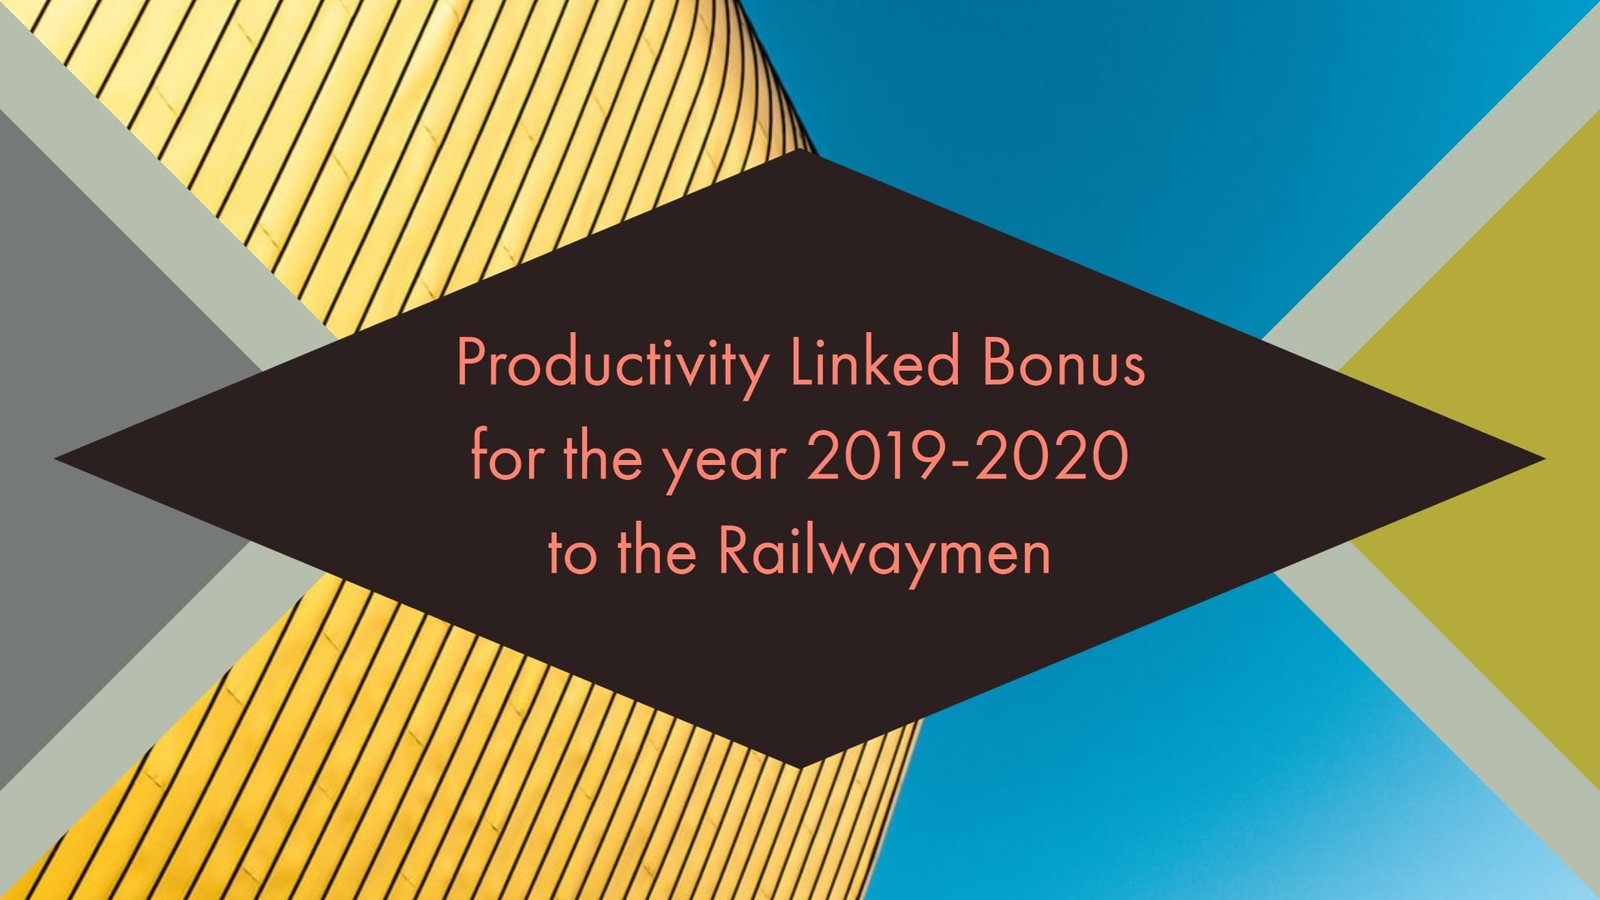 Productivity Linked Bonus for the year 2019-2020 to the Railwaymen